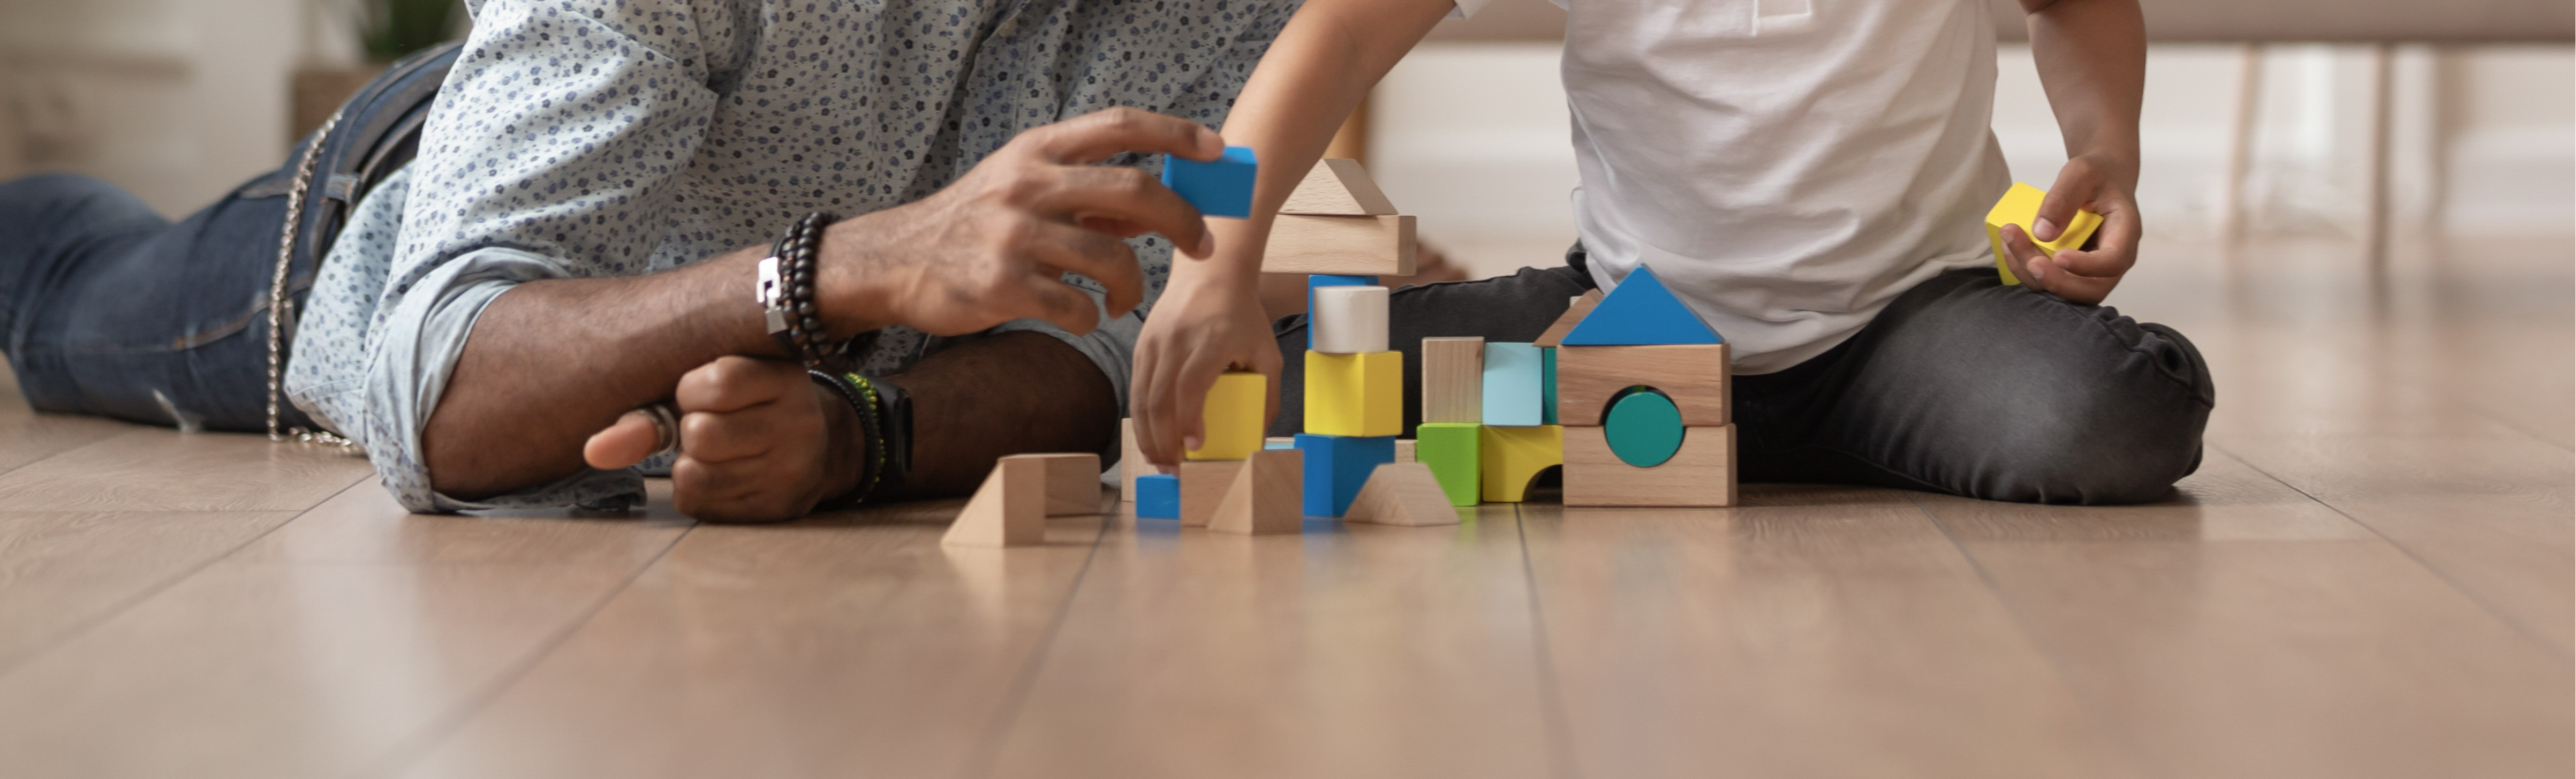 A cropped picture showing a father and his child playing with toy building blocks.